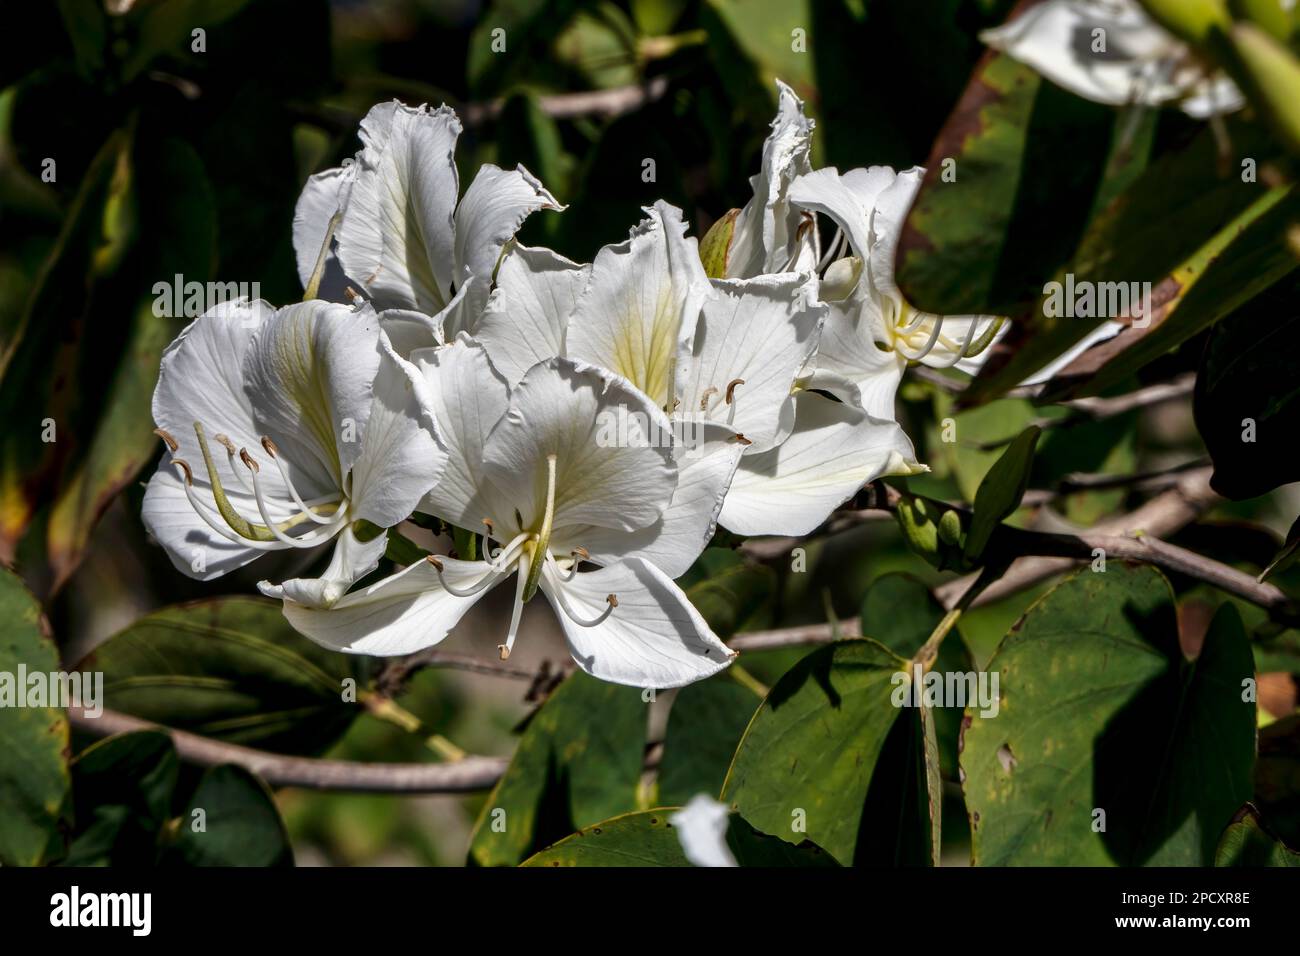 White flowers of the Bauhinia tree close up. Blooming orchid tree in the sun Stock Photo